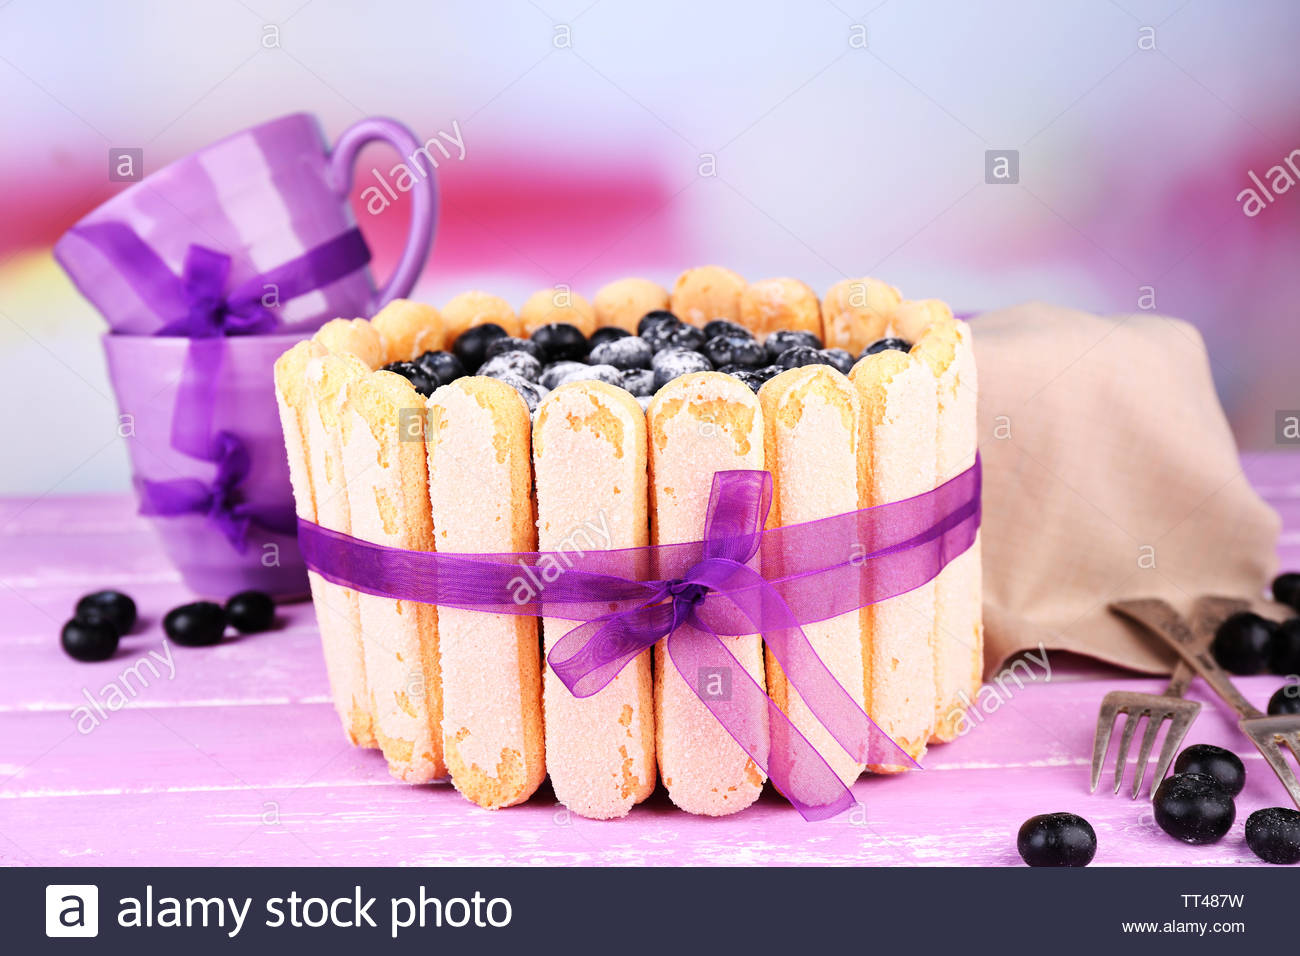 Tasty Cake Charlotte With Blueberries On Wooden Table Light